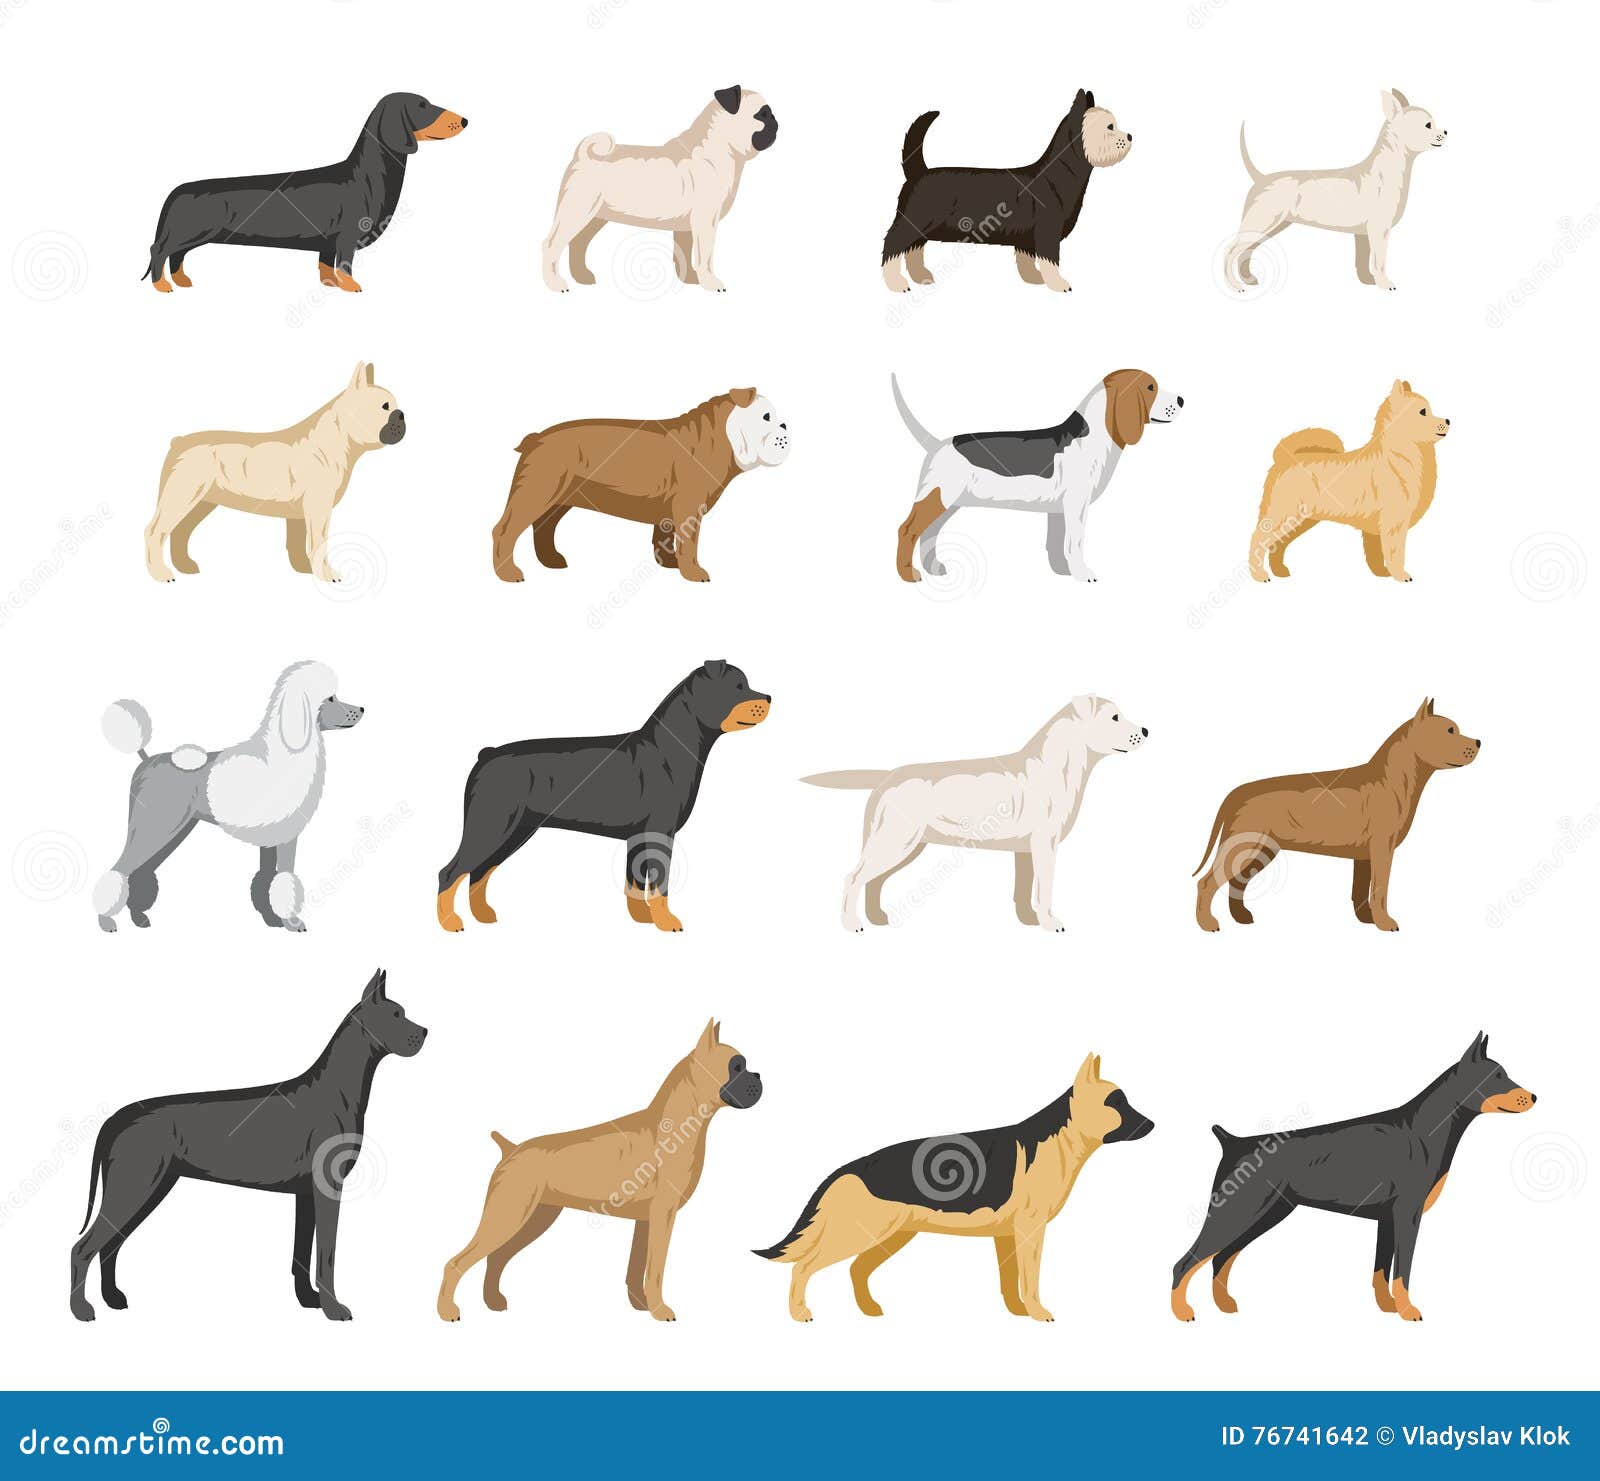  dog breeds collection  on white